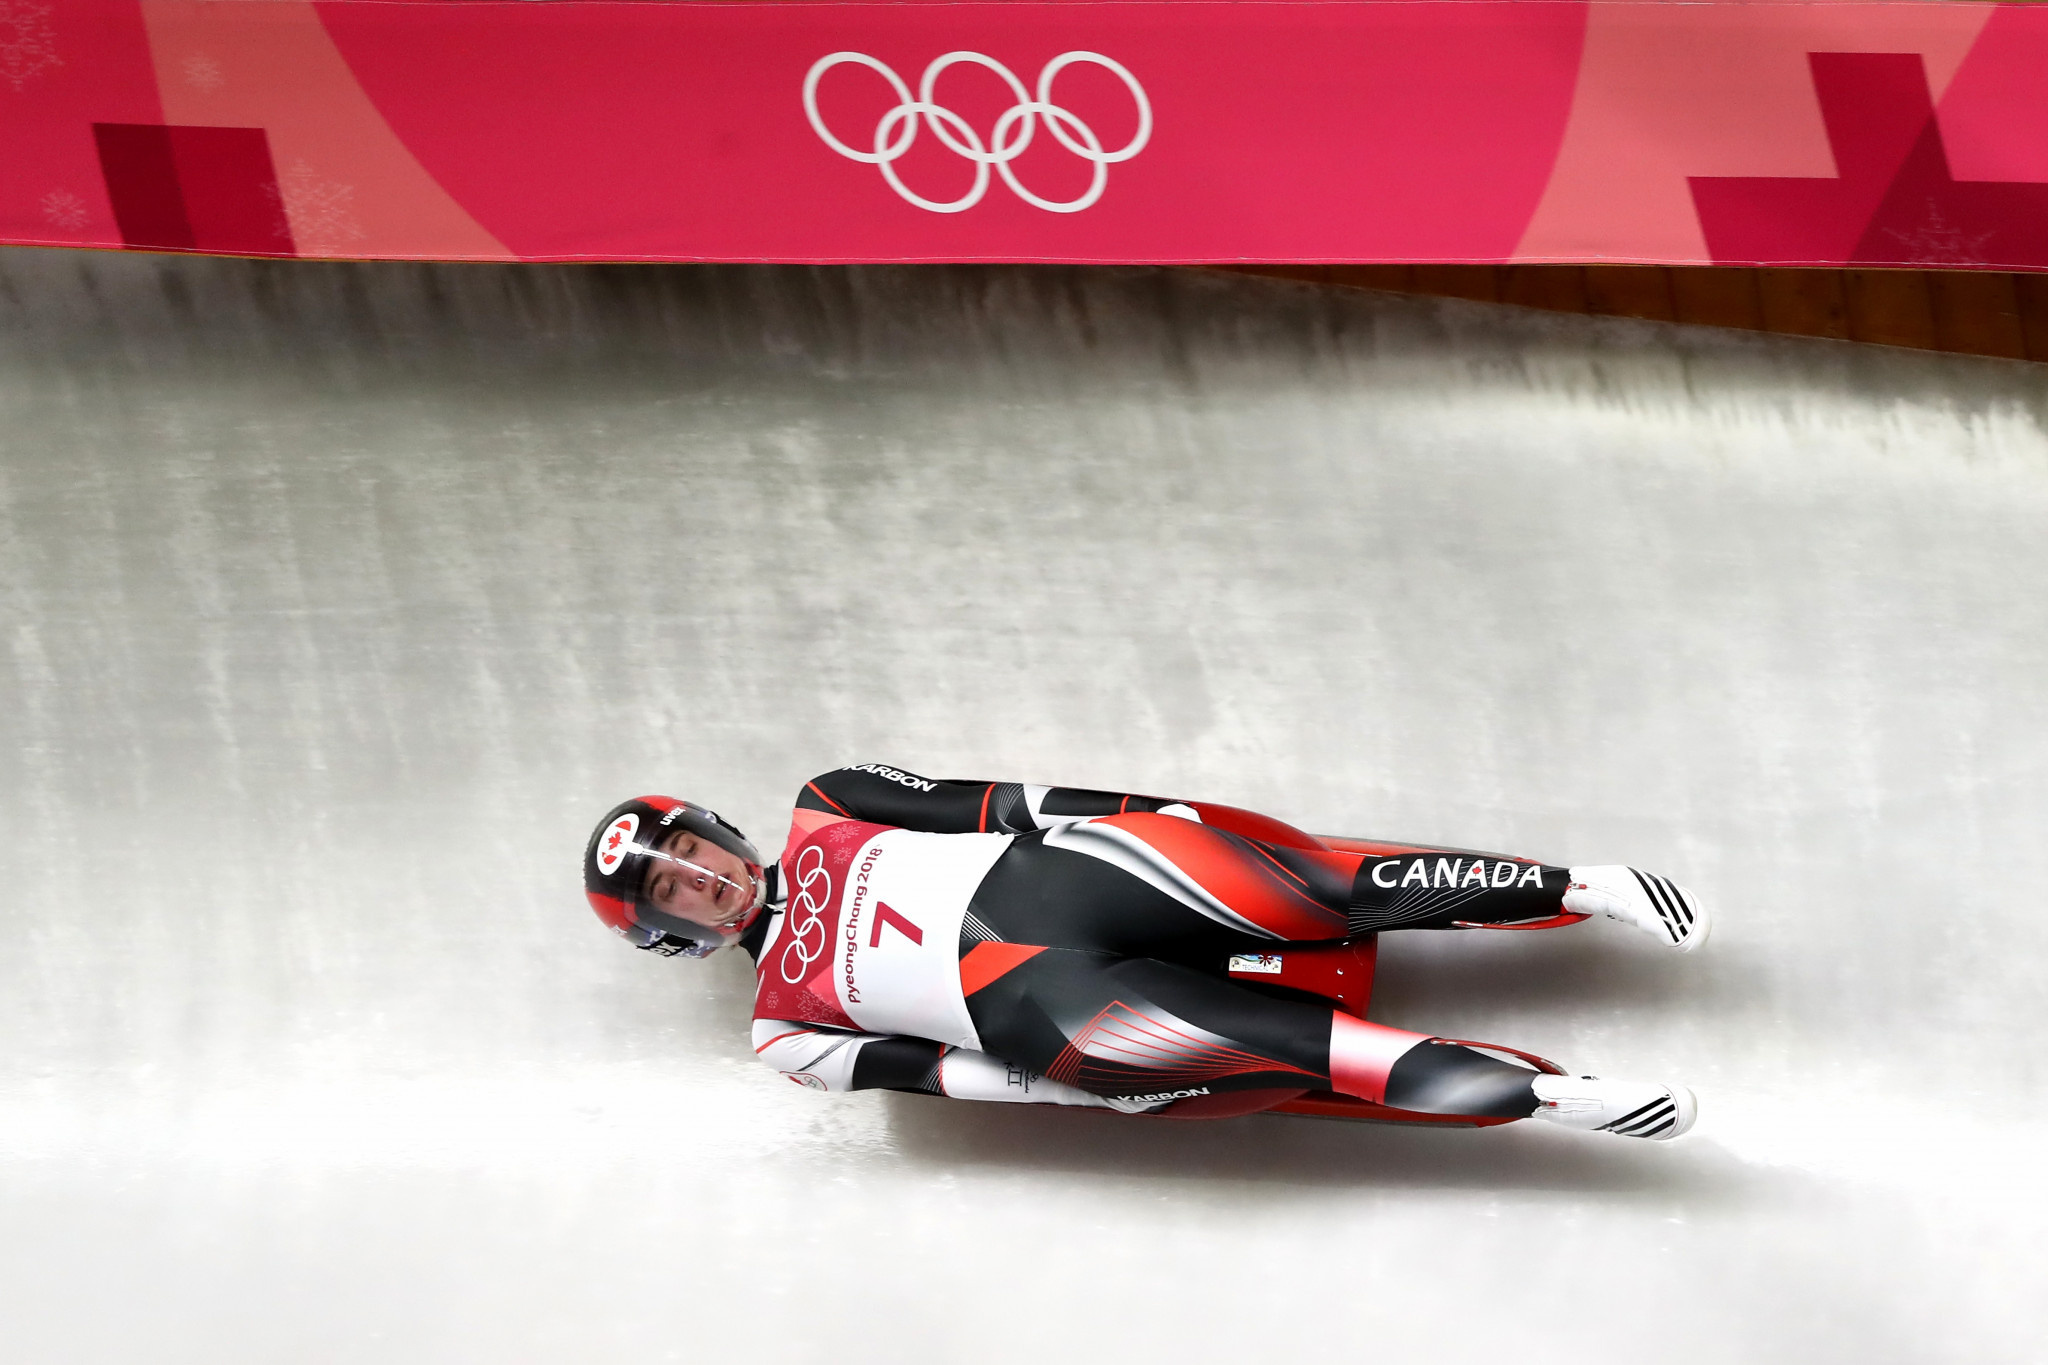 Luge: A Canadian luger competes at the 2018 PyeongChang Winter Olympic Games. 2050x1370 HD Background.